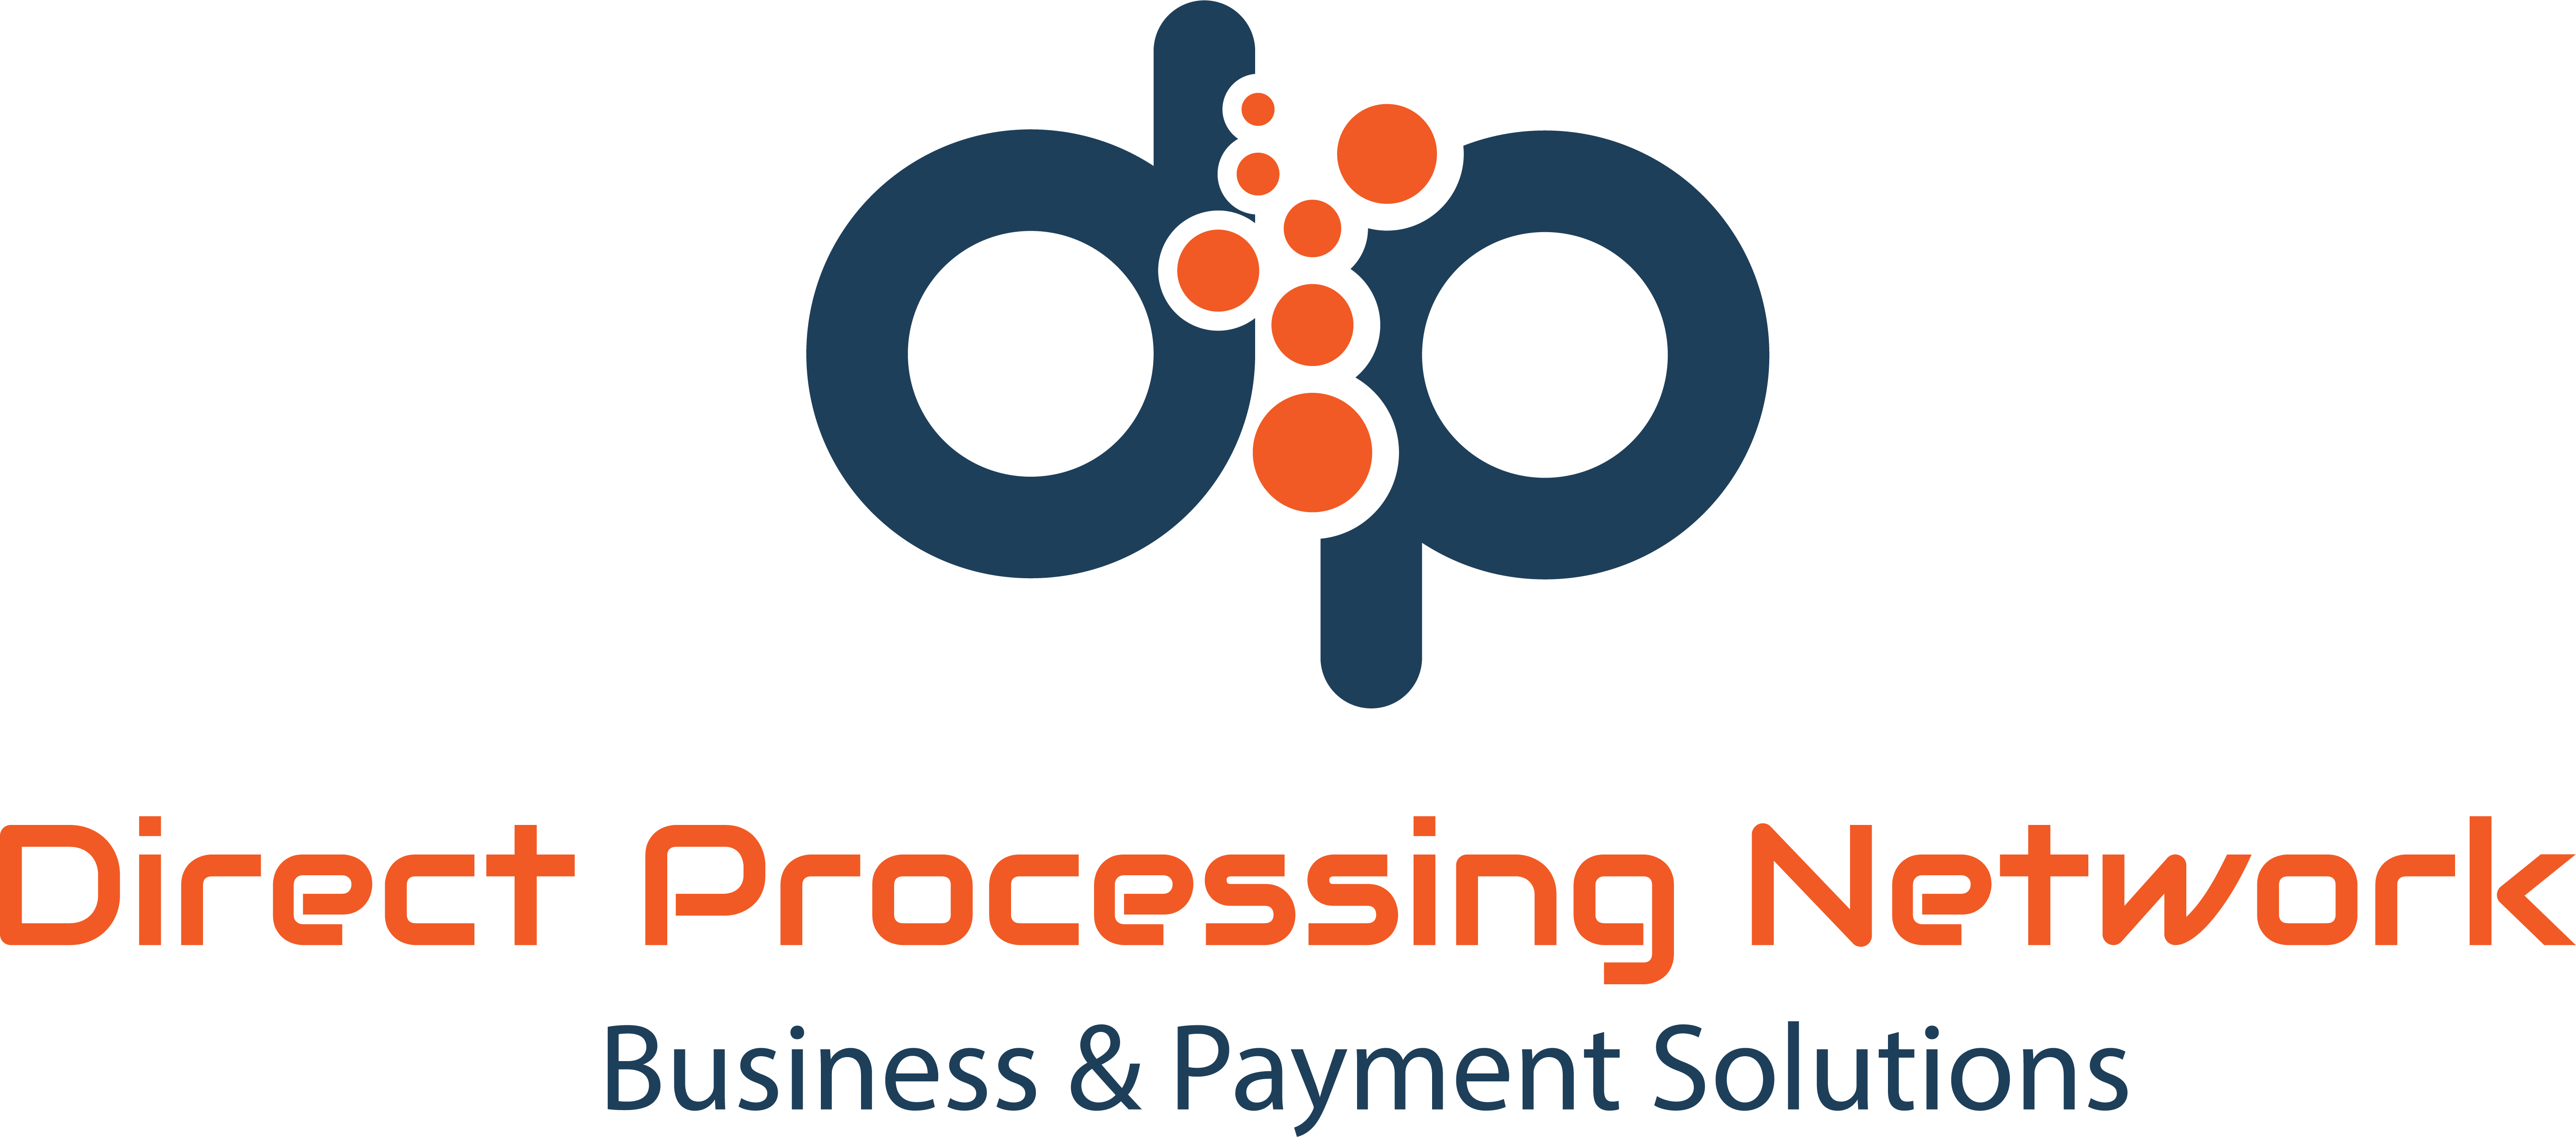 Direct Processing Network